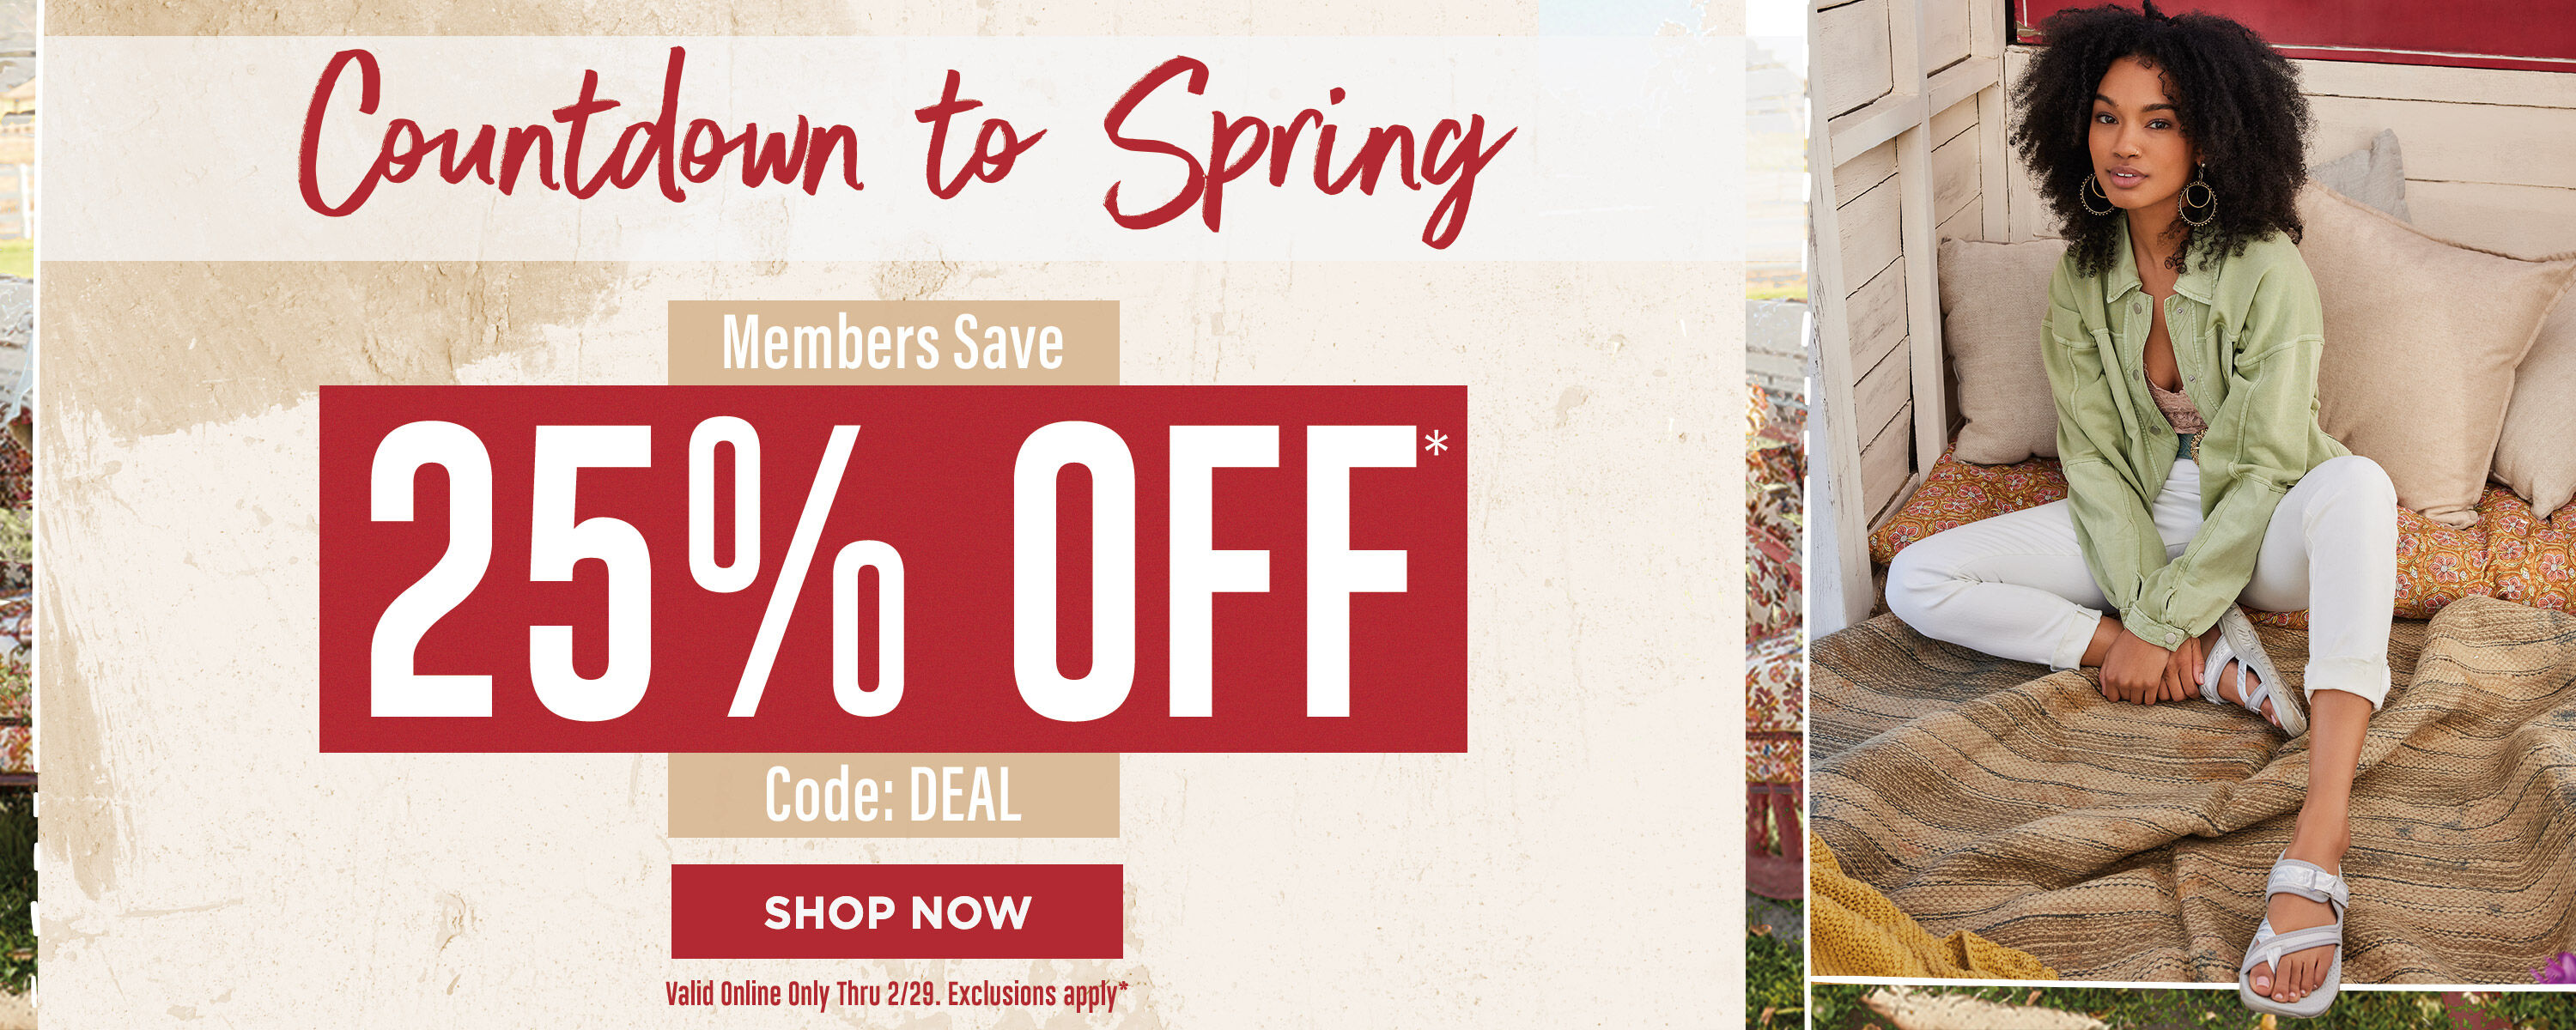 Countdown to Spring : Members Save 25% off with code "DEAL" ~ SHOP NOW